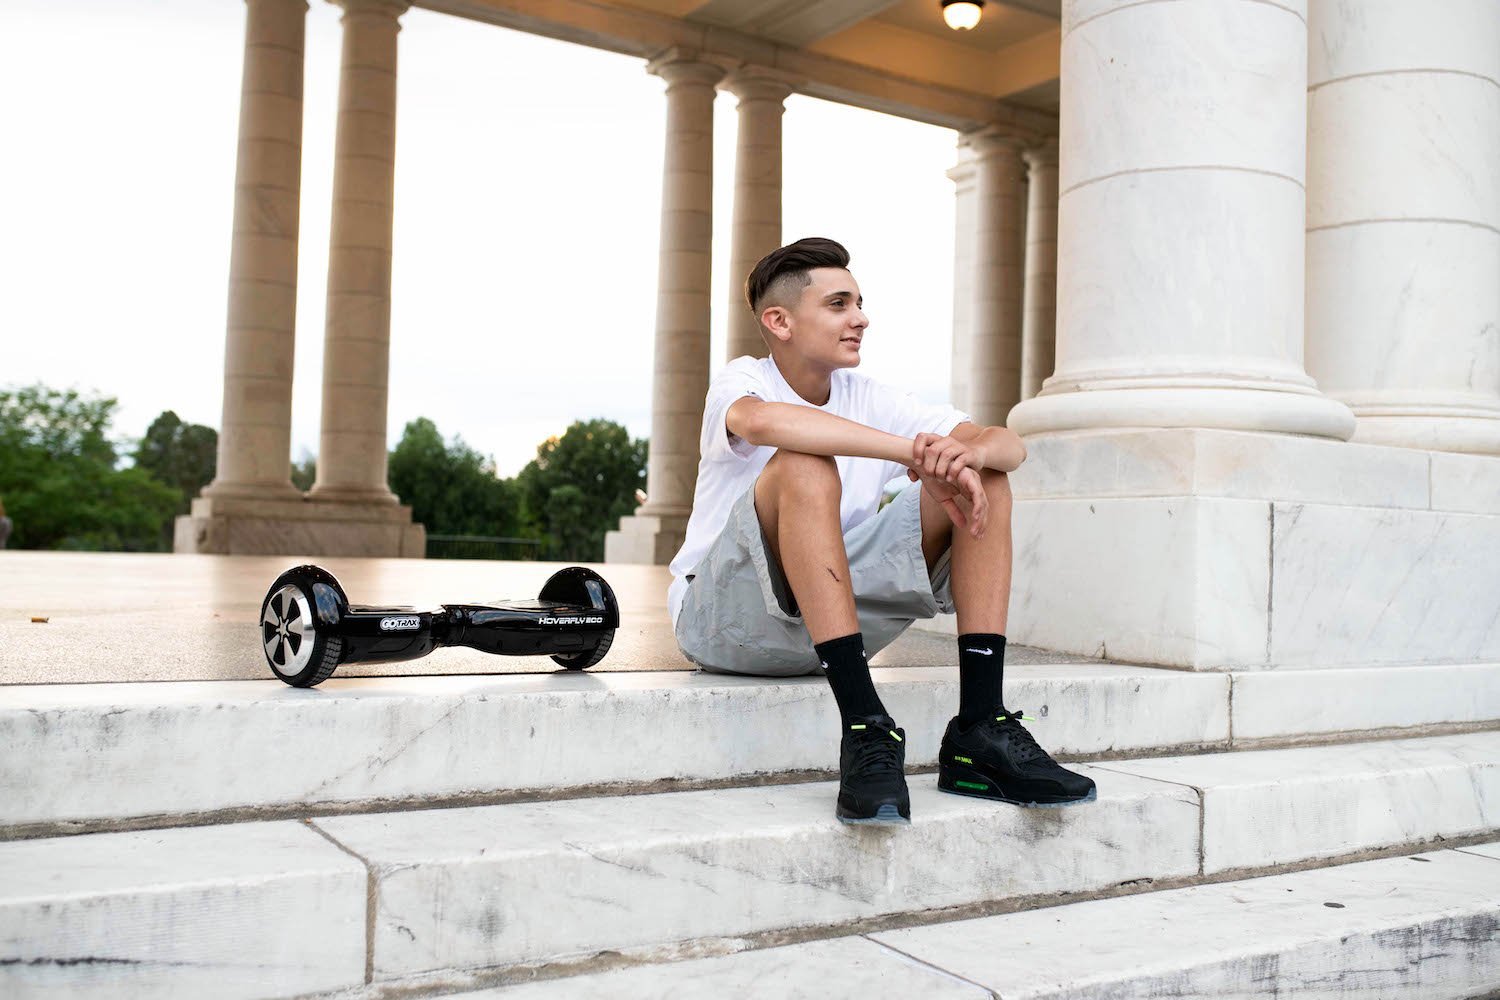 Hoverboards under $100 - GOTRAX